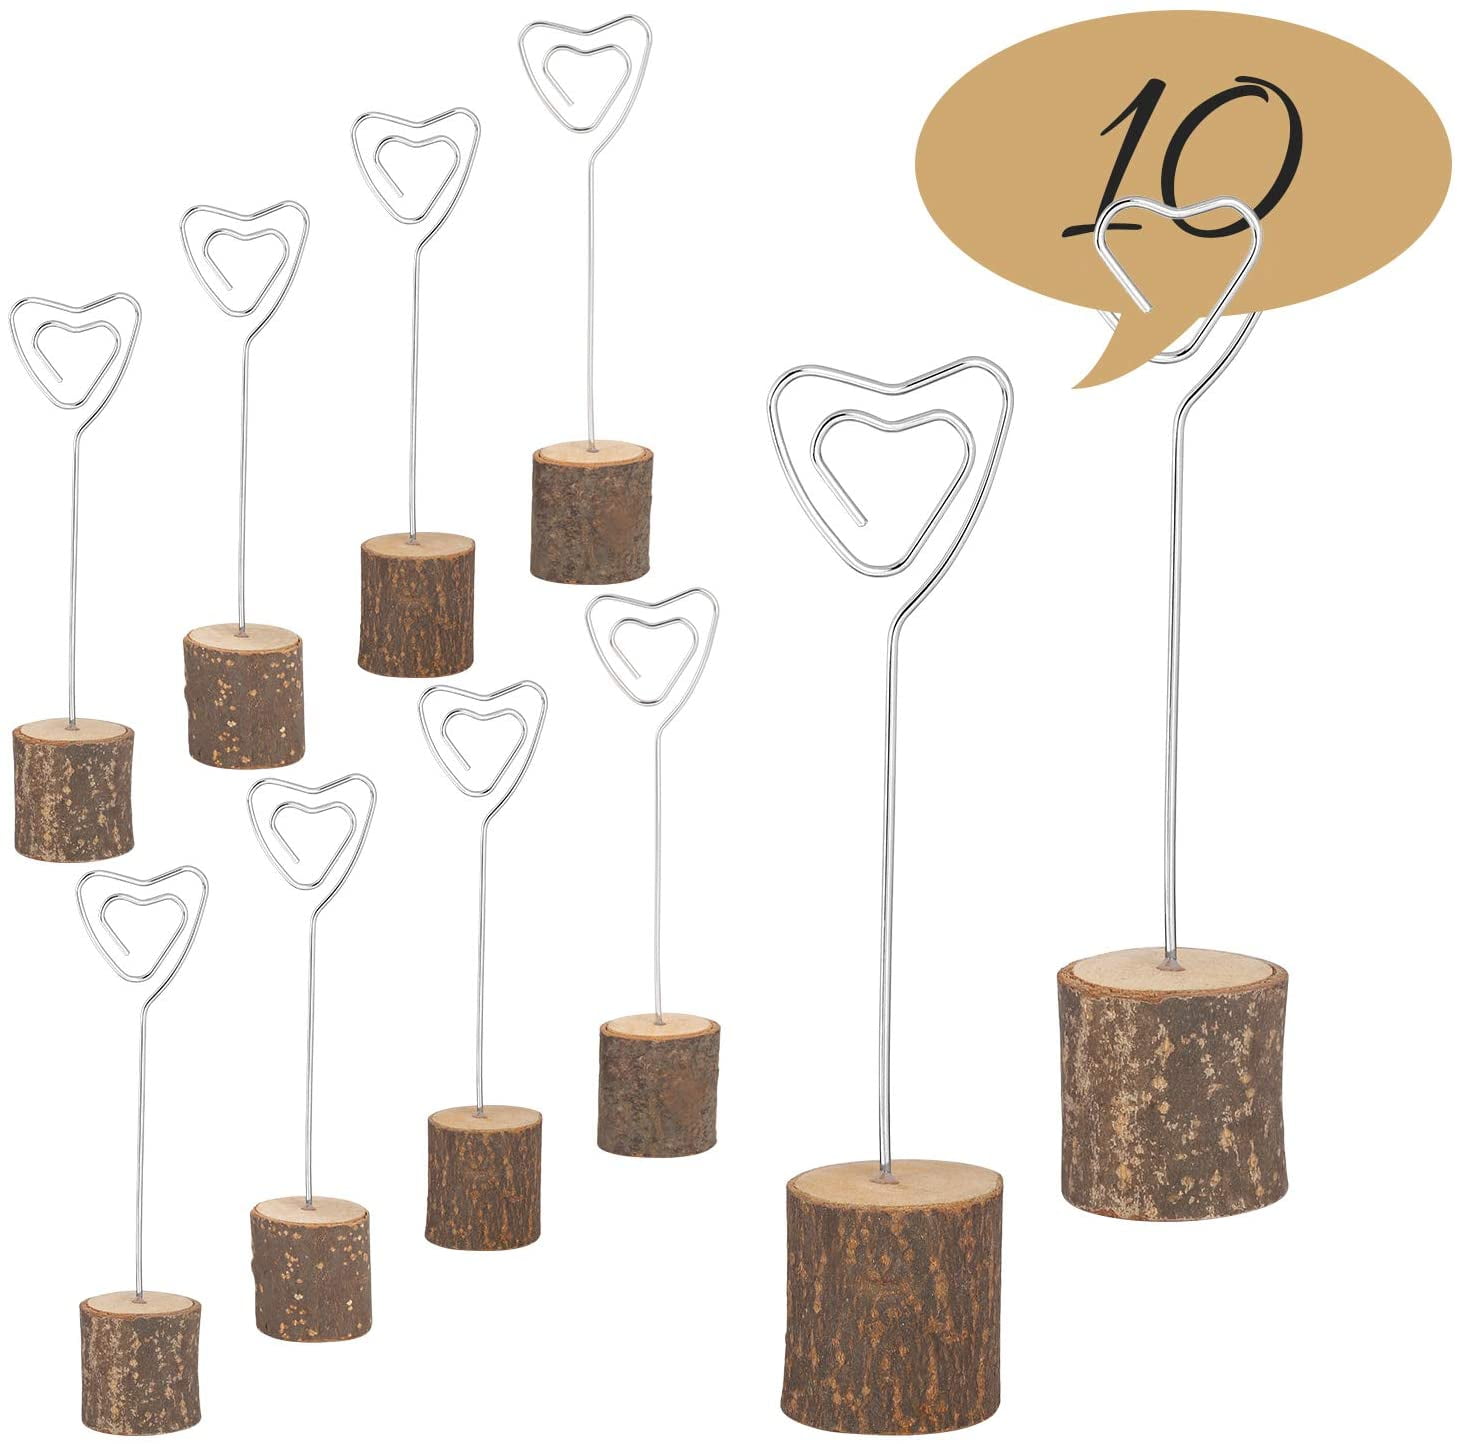 Group 1 20 Pcs Rustic Wood Base Wedding Table Name Sign Number Holder with Kraft Place Cards for Party Decoration Invitation Card Holders Picture Memo Clip Note Photo Clip